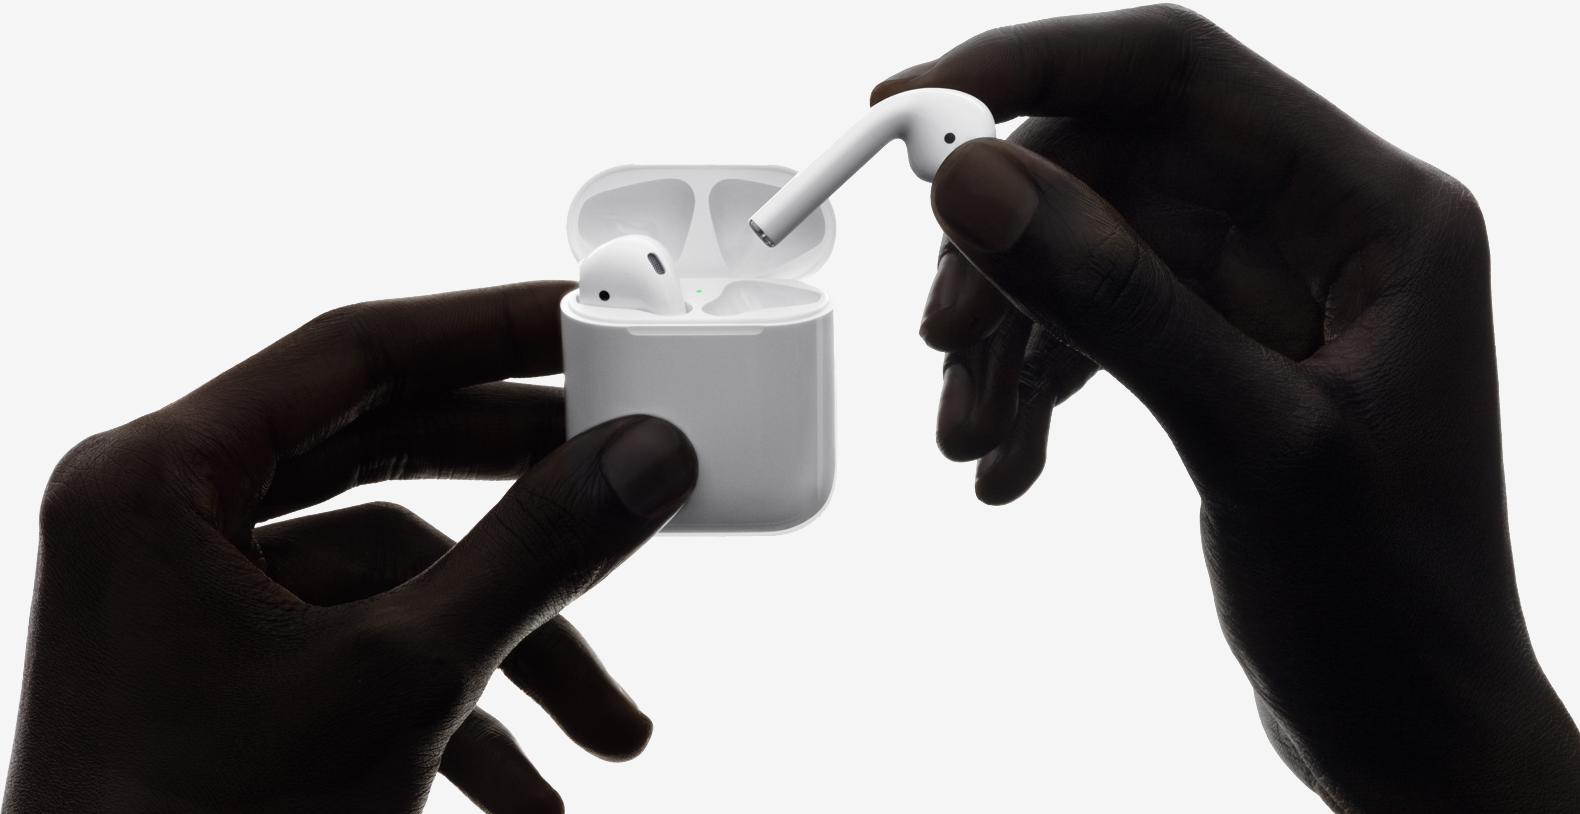 Apple delays AirPods launch, says it needs more time